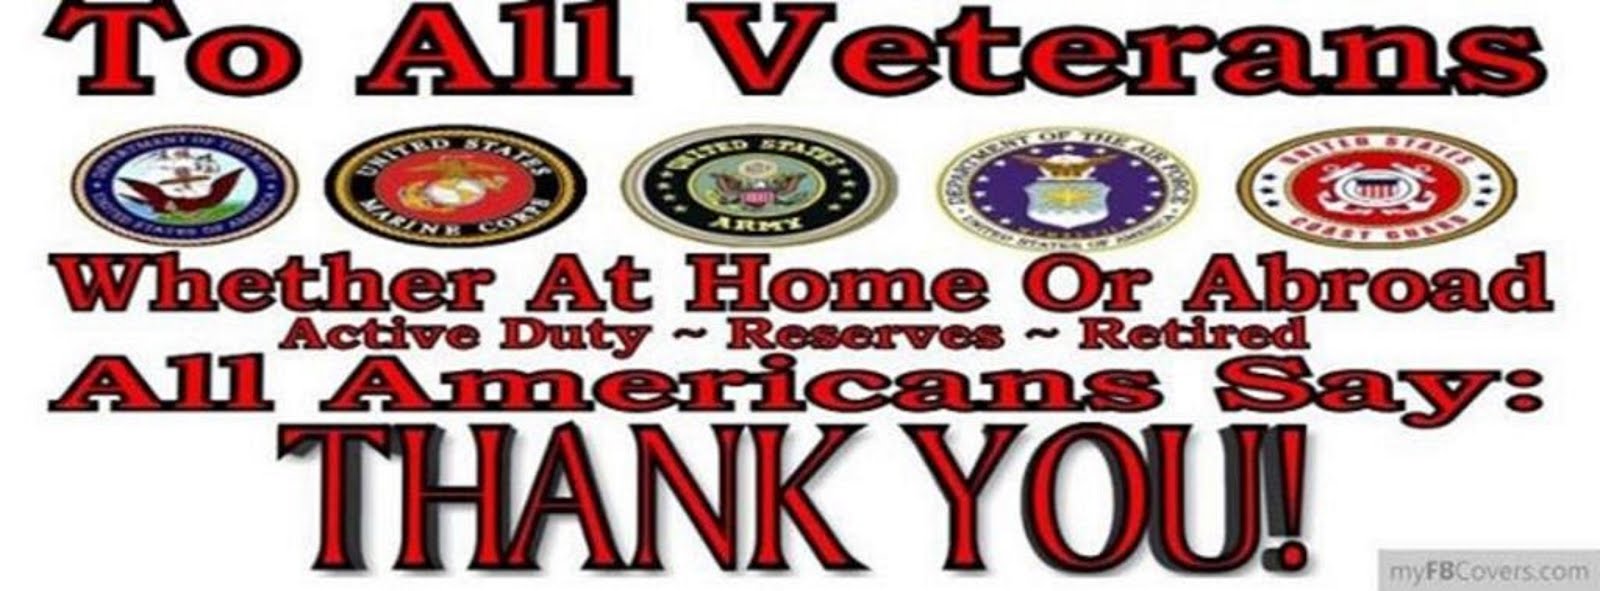 TO ALL VETERANS